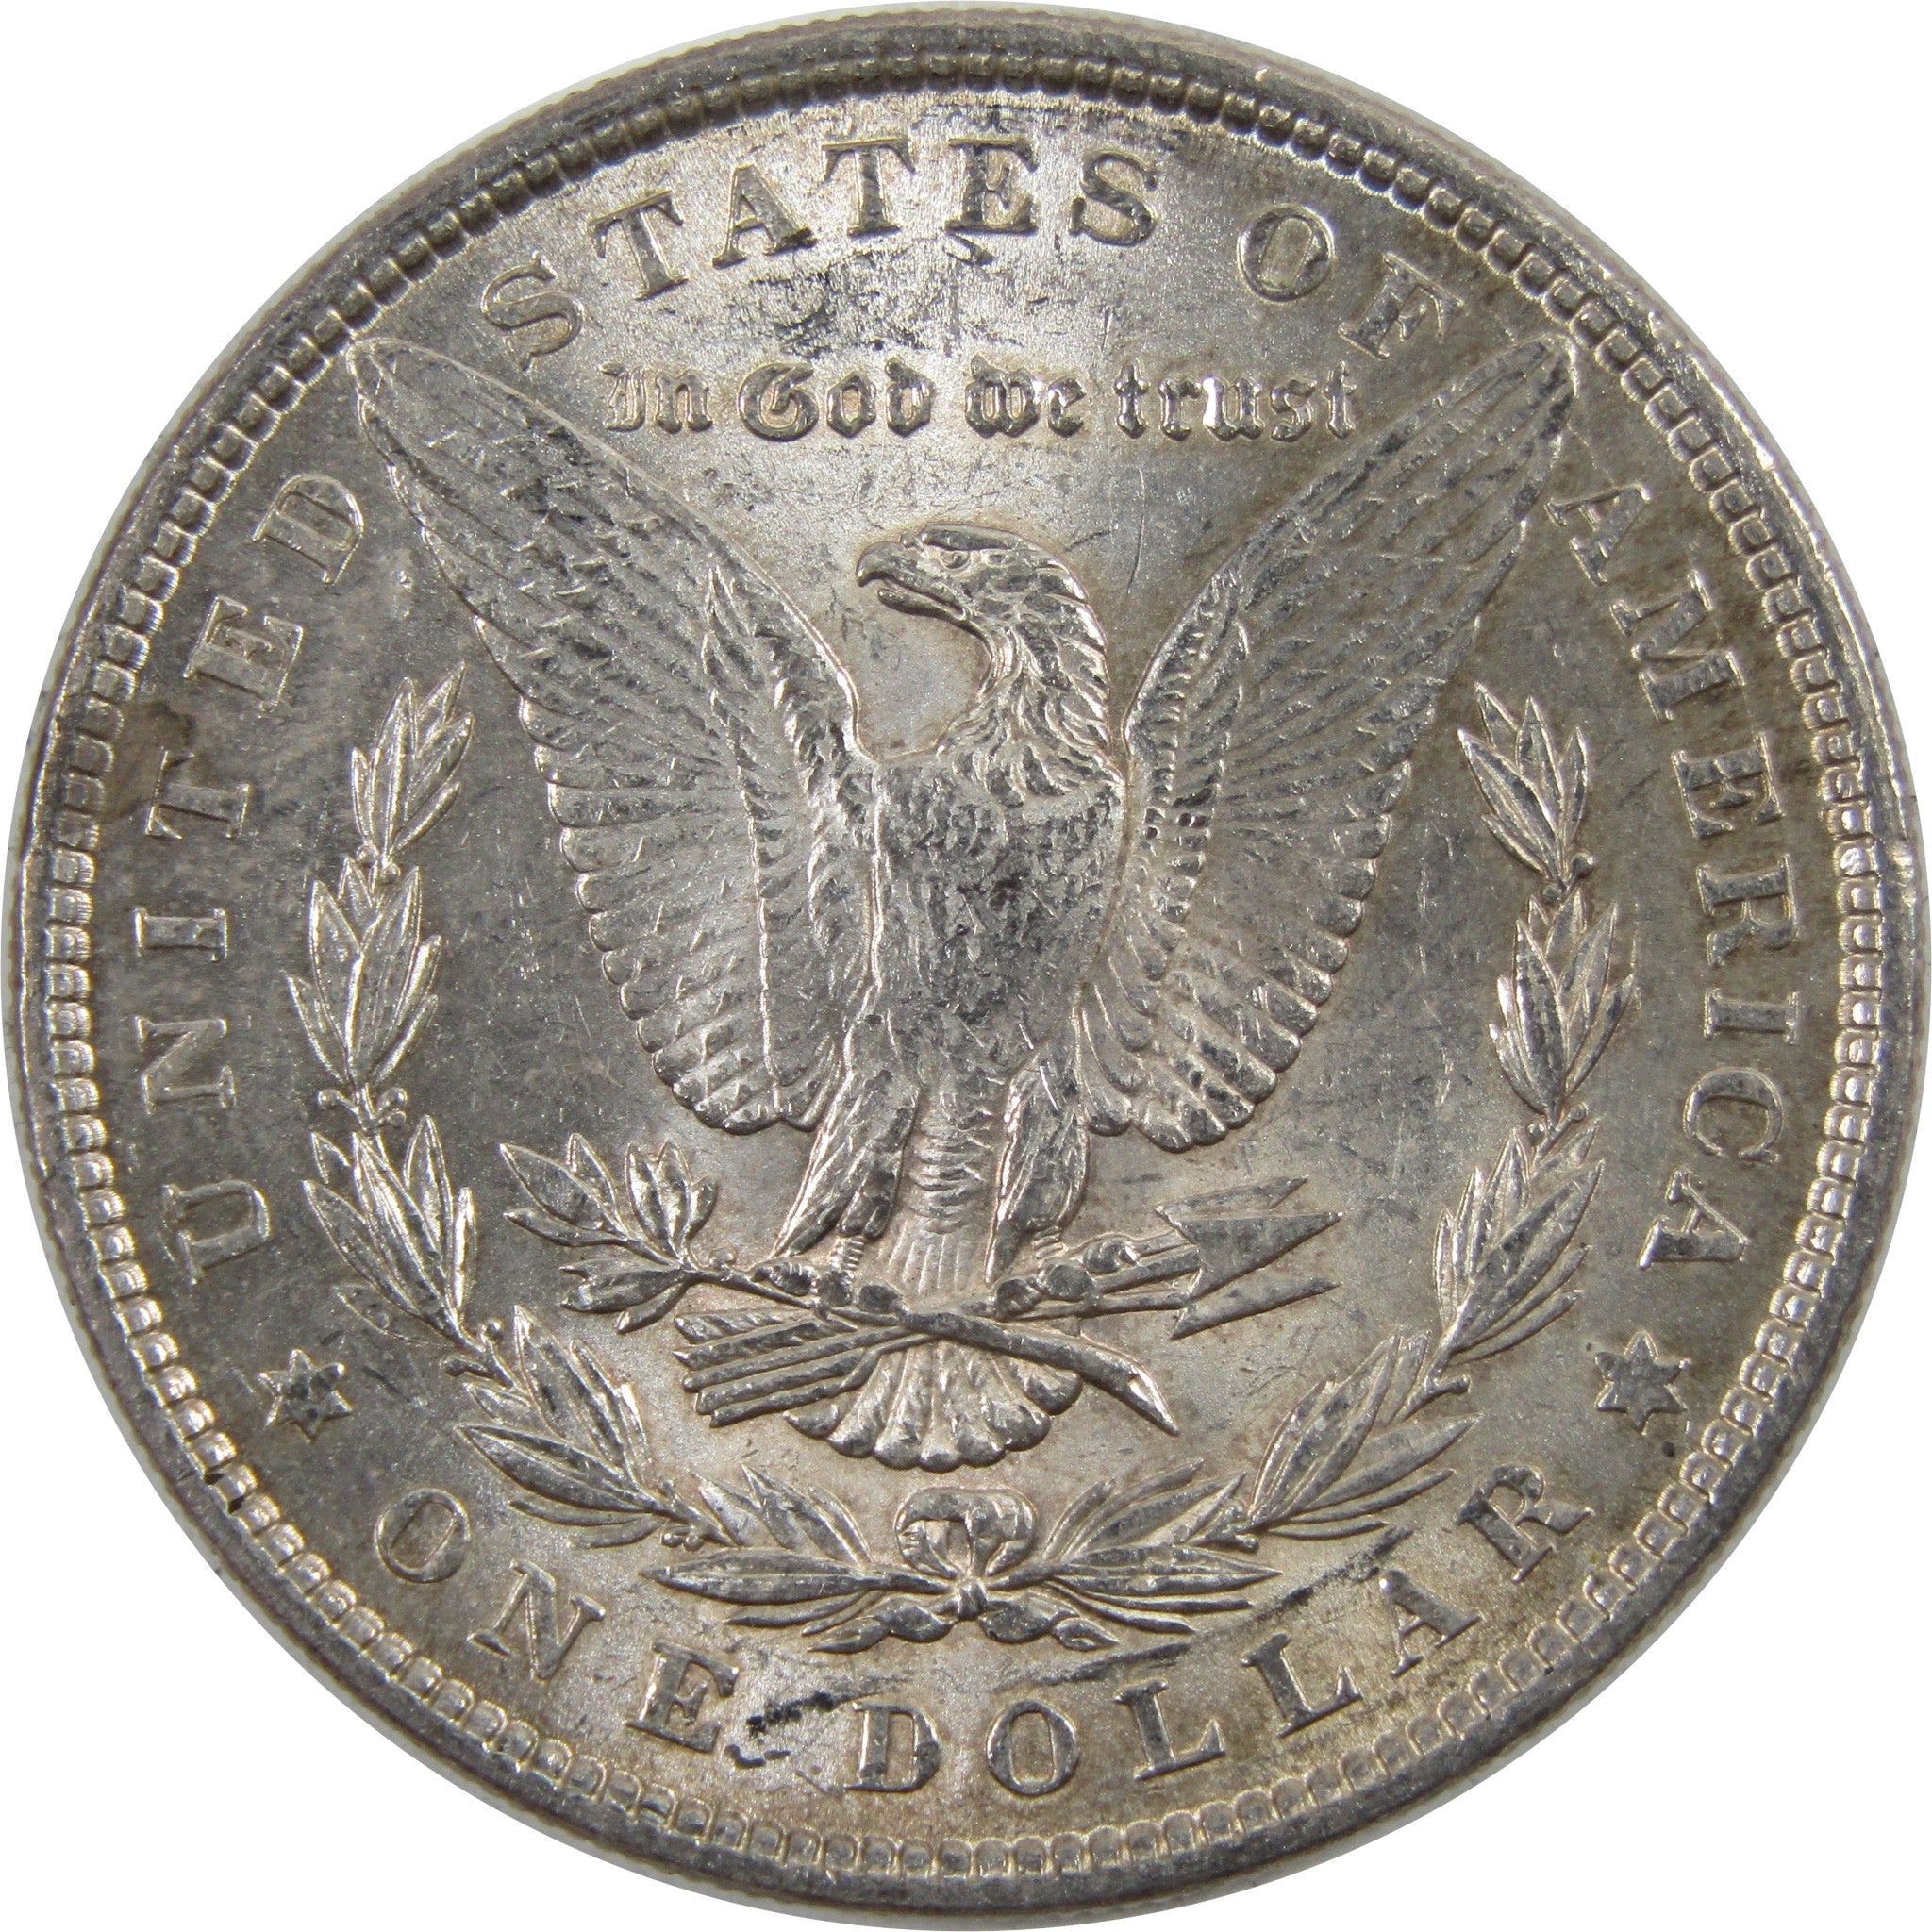 1886 Morgan Dollar AU About Uncirculated 90% Silver $1 Coin SKU:I5493 - Morgan coin - Morgan silver dollar - Morgan silver dollar for sale - Profile Coins &amp; Collectibles